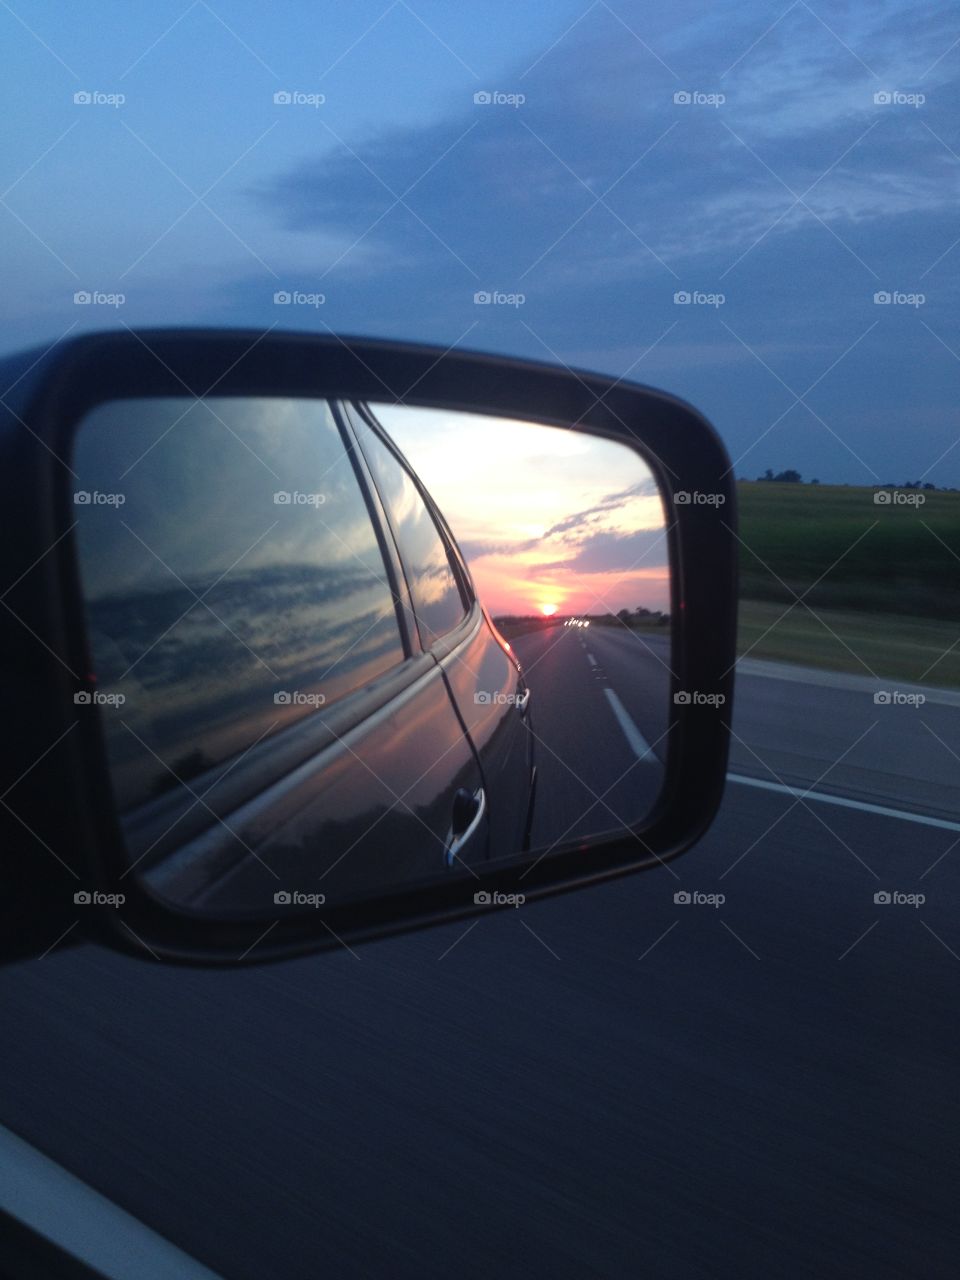 Beauty in the rear view.